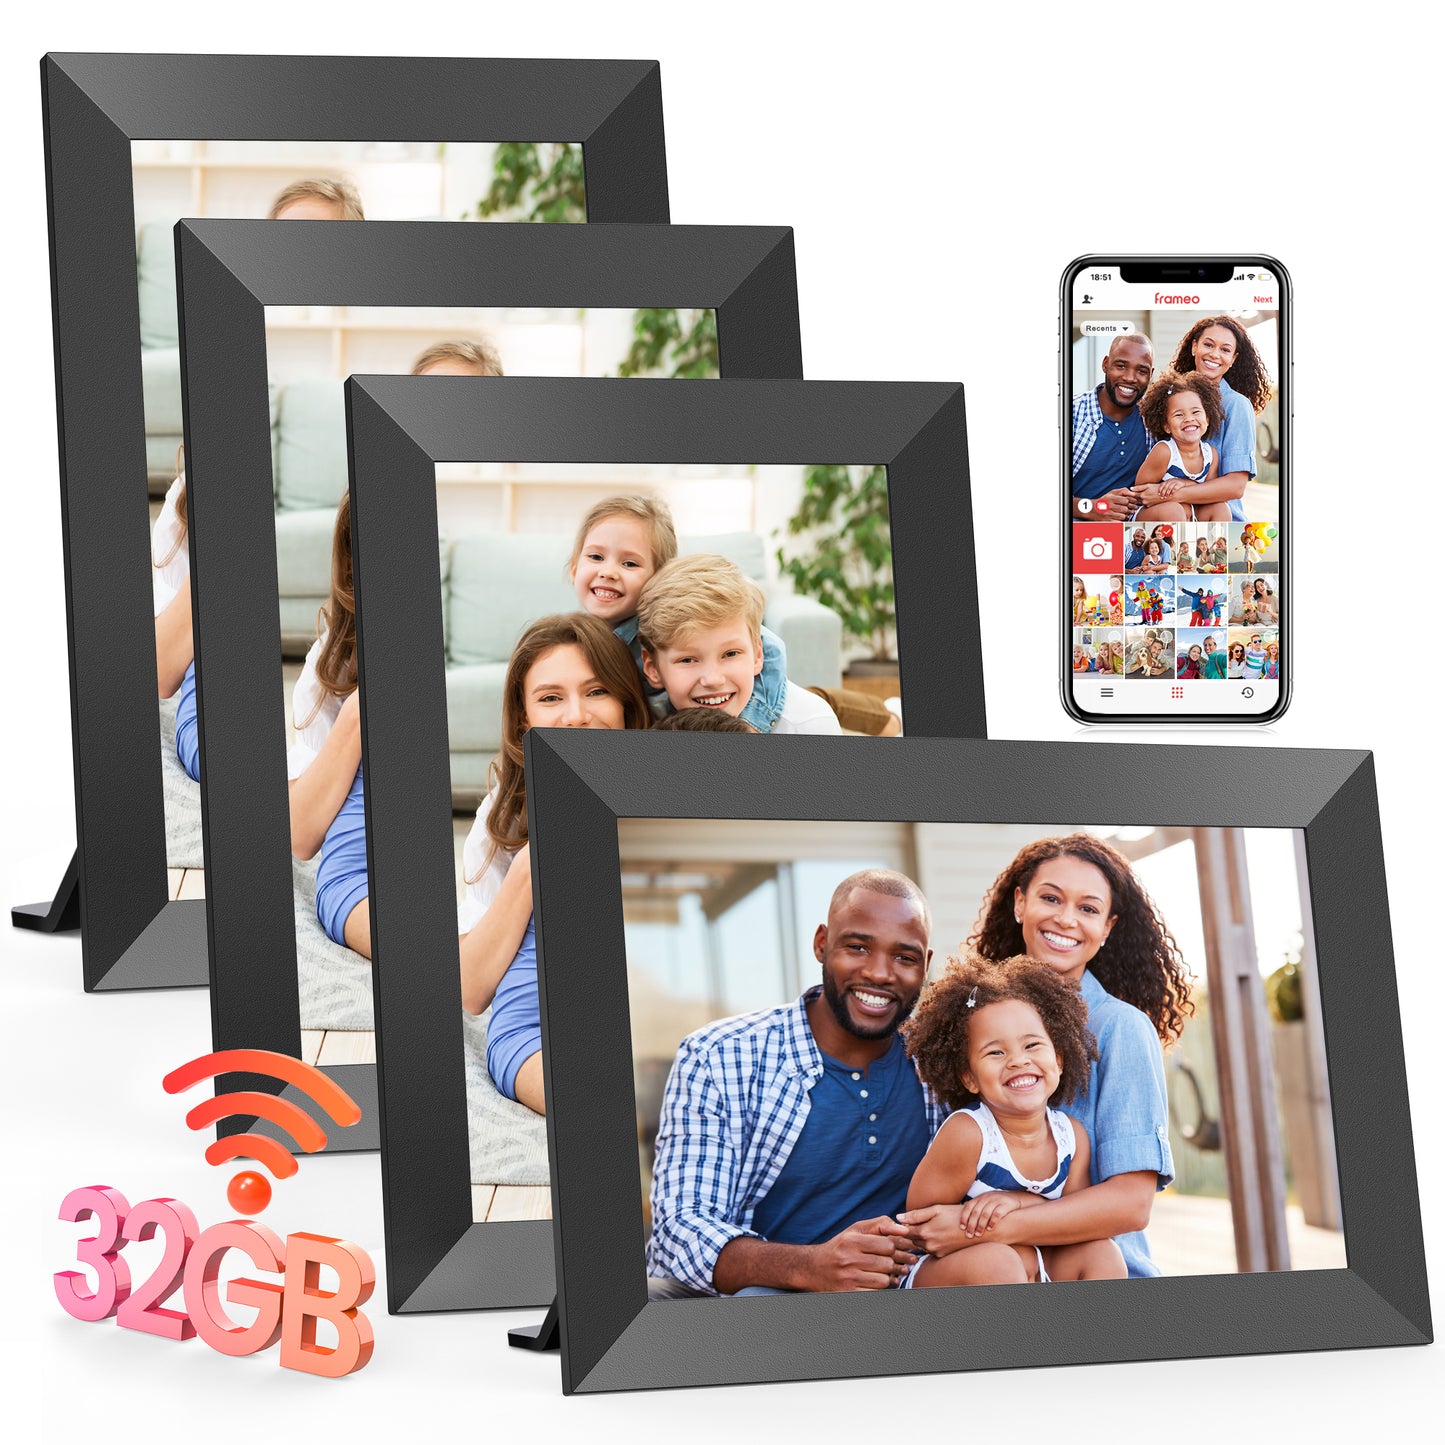 Frameo WiFi Digital Picture Frames 4 Pack, TEMASH 10.1" Digital Photo Frame 32G Memory with 1280*800 IPS Touchscreen, Wall Mount Auto Rotate Electronic Picture Frame, Gift for A Loved One!